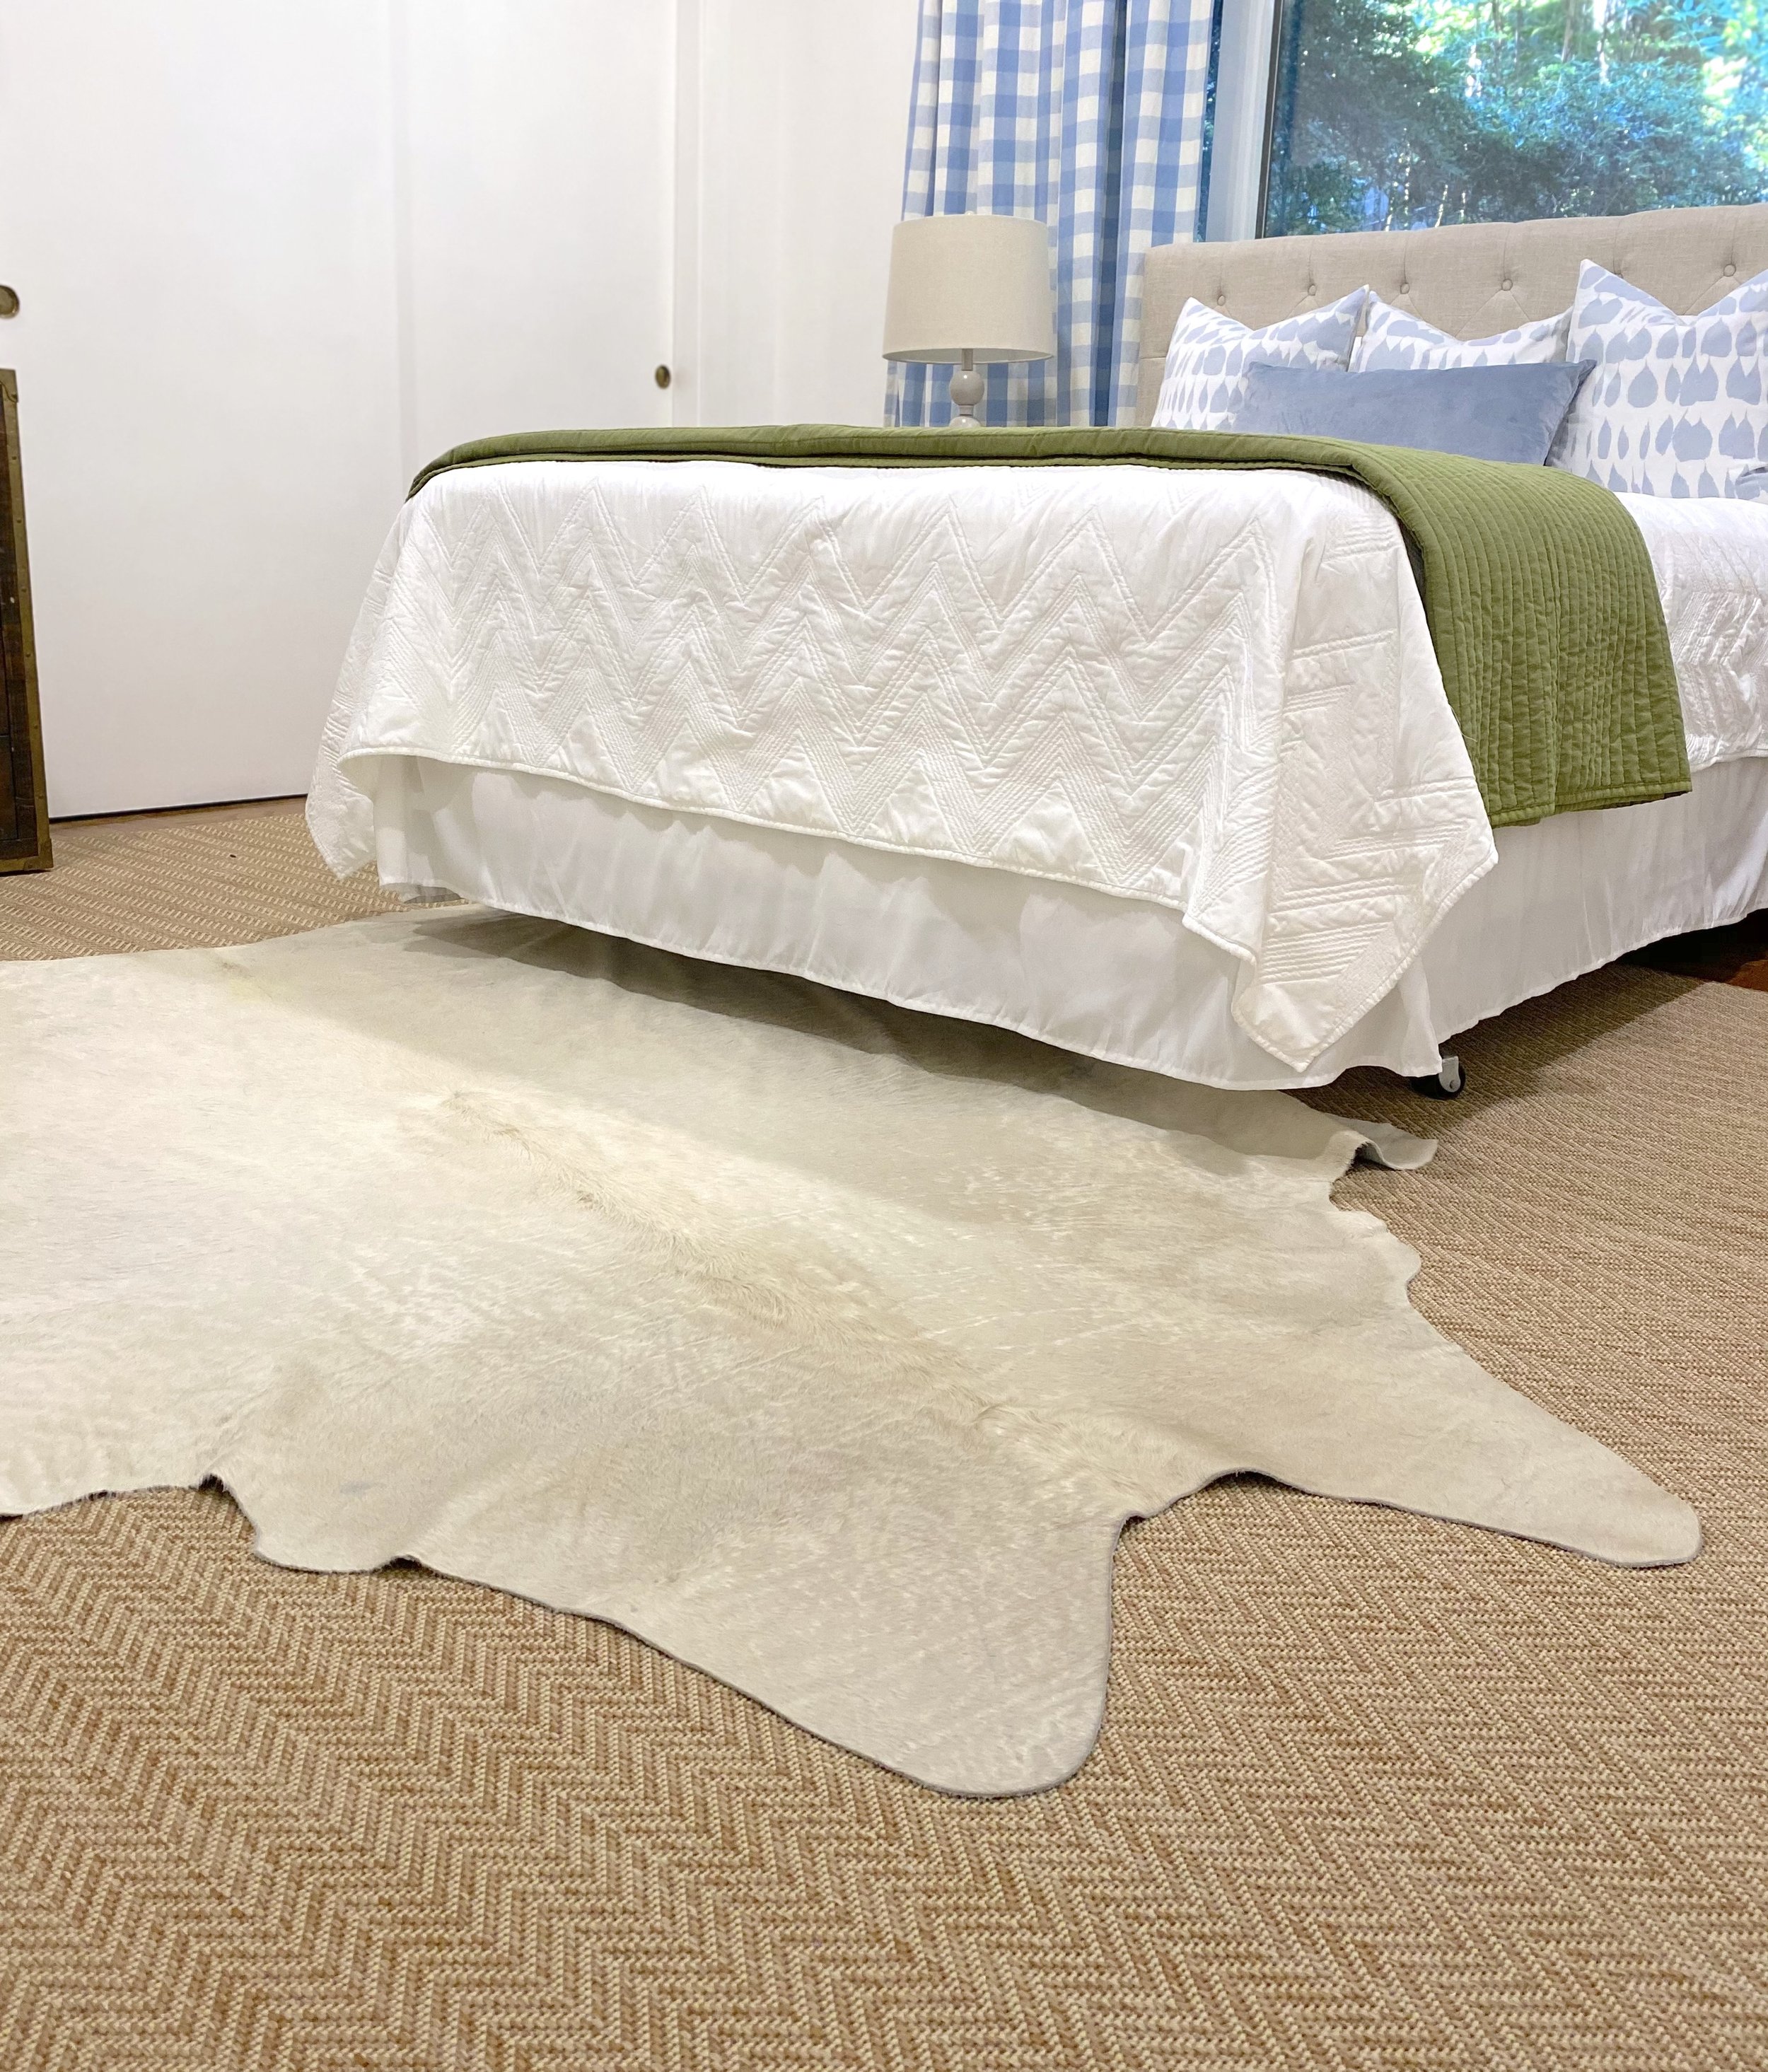 How to Keep a Cowhide Rug From Sliding